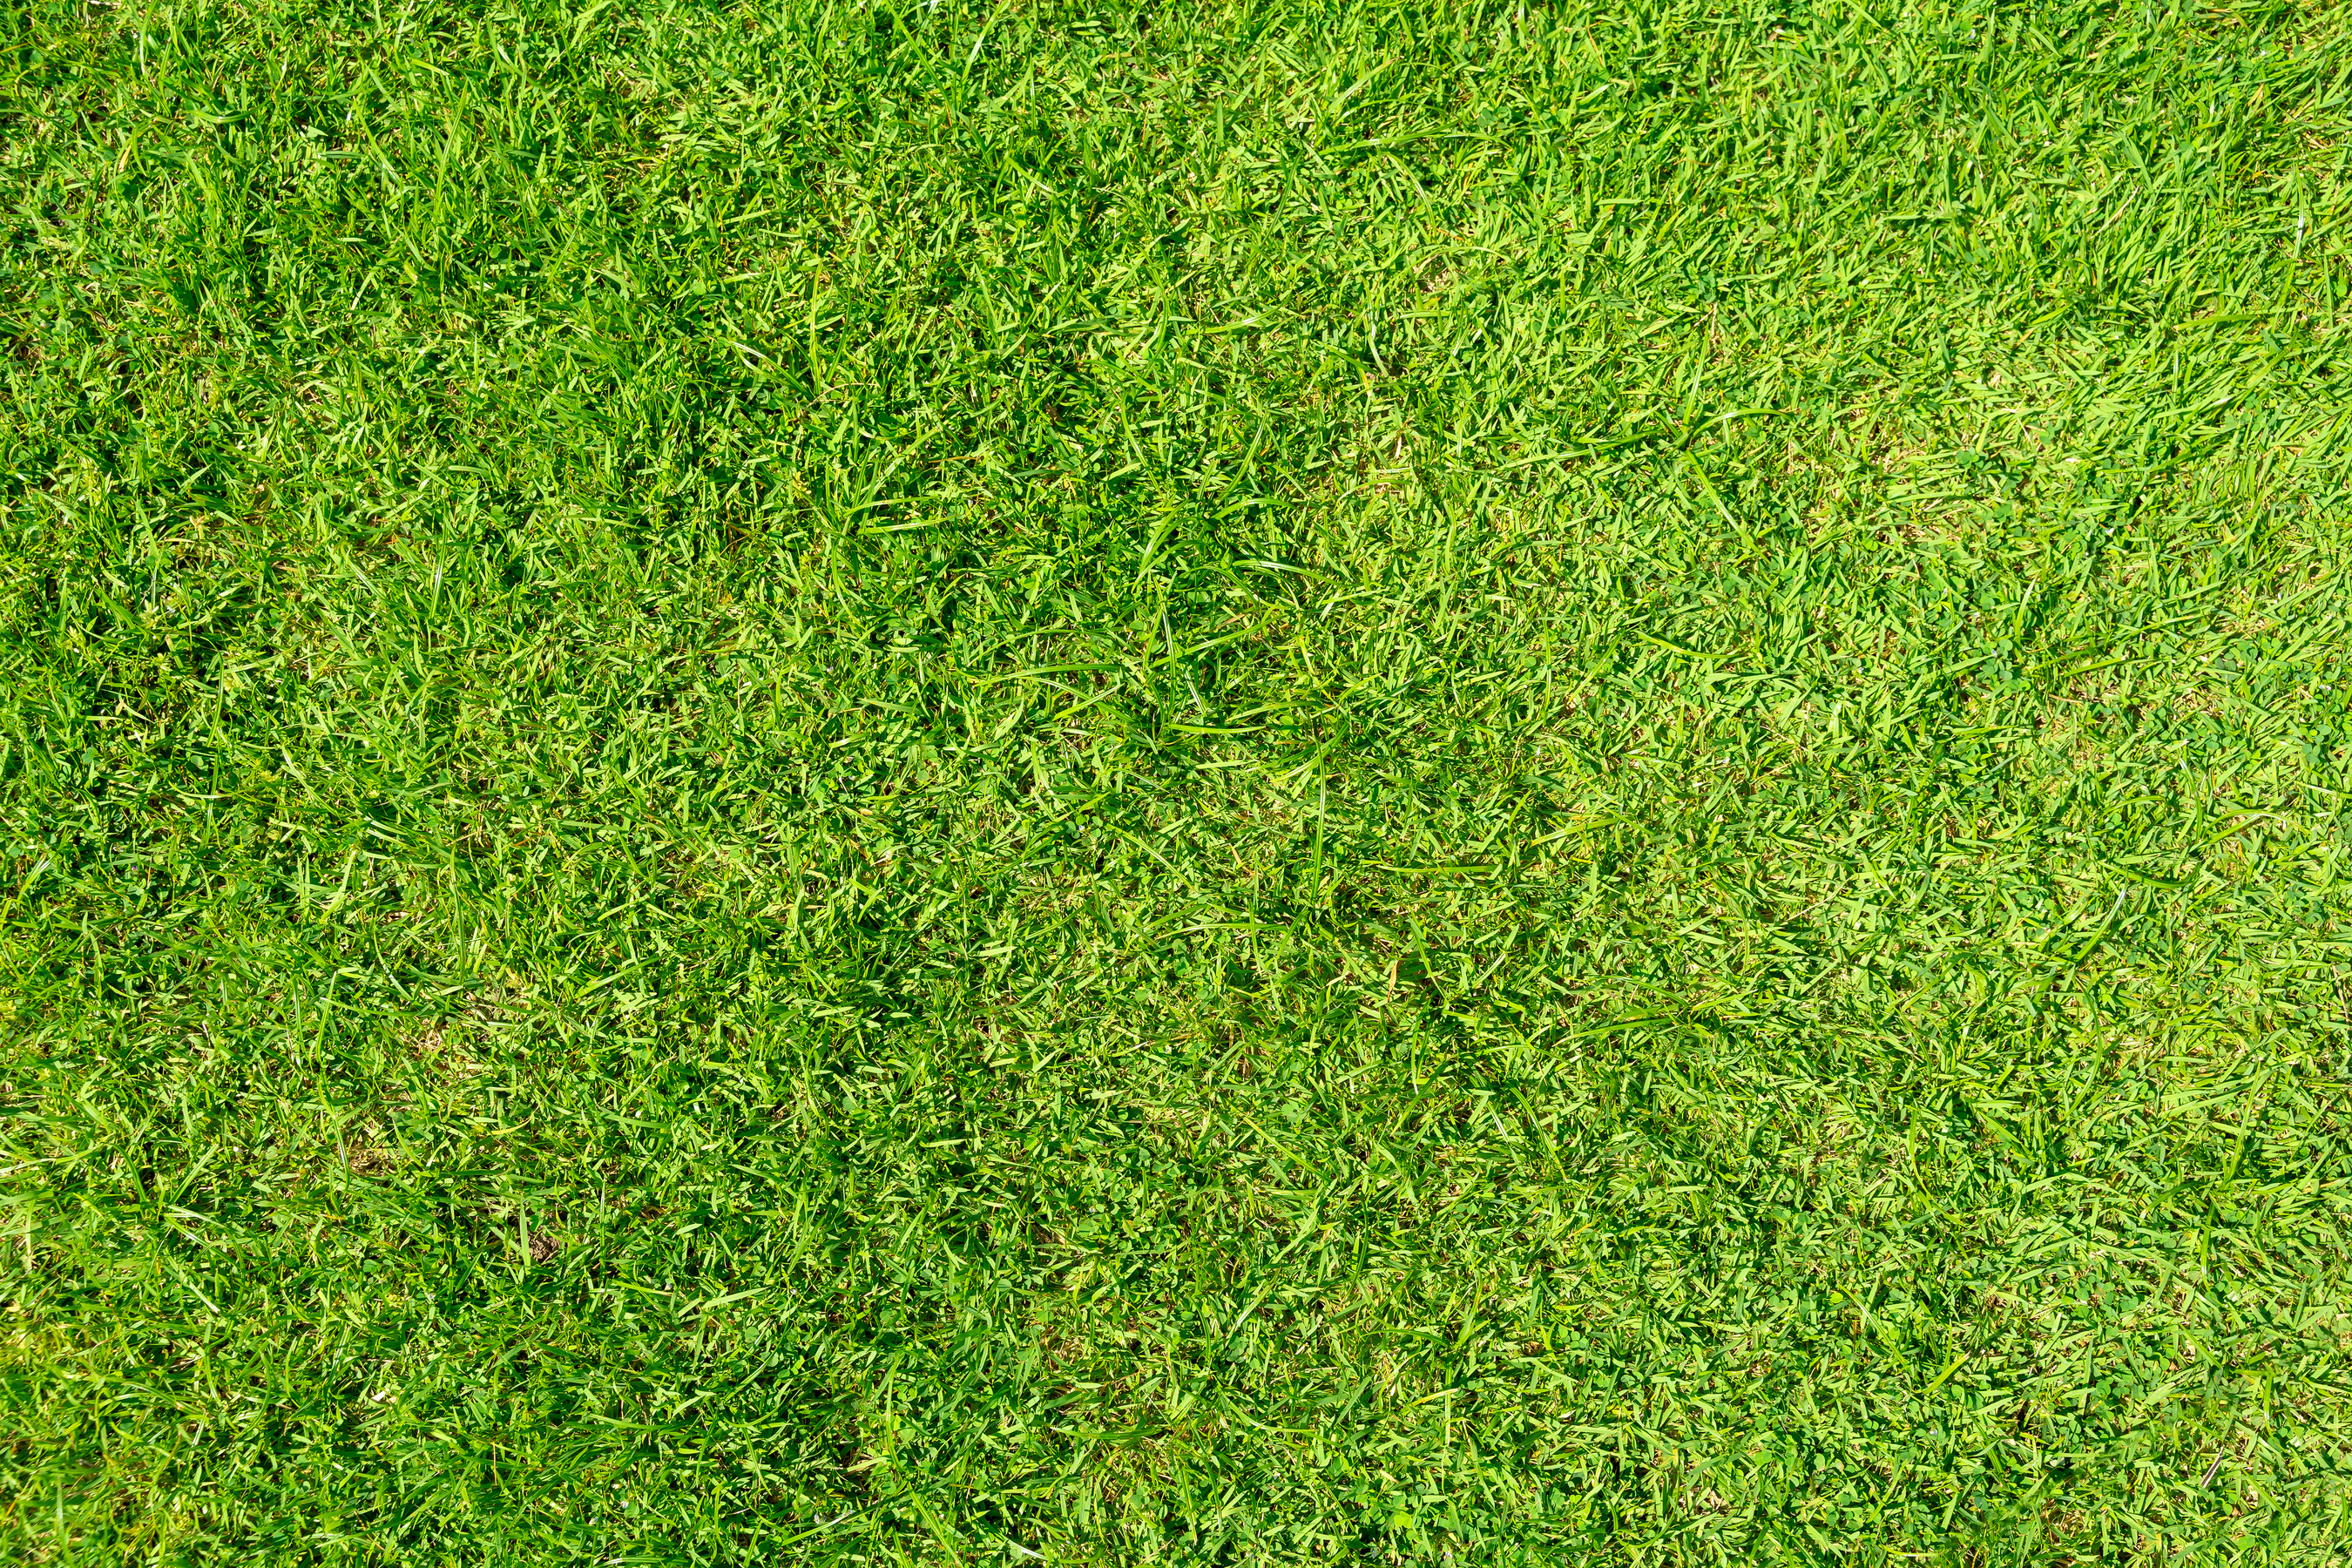  Green Grass Is Used to Make Sports Fields